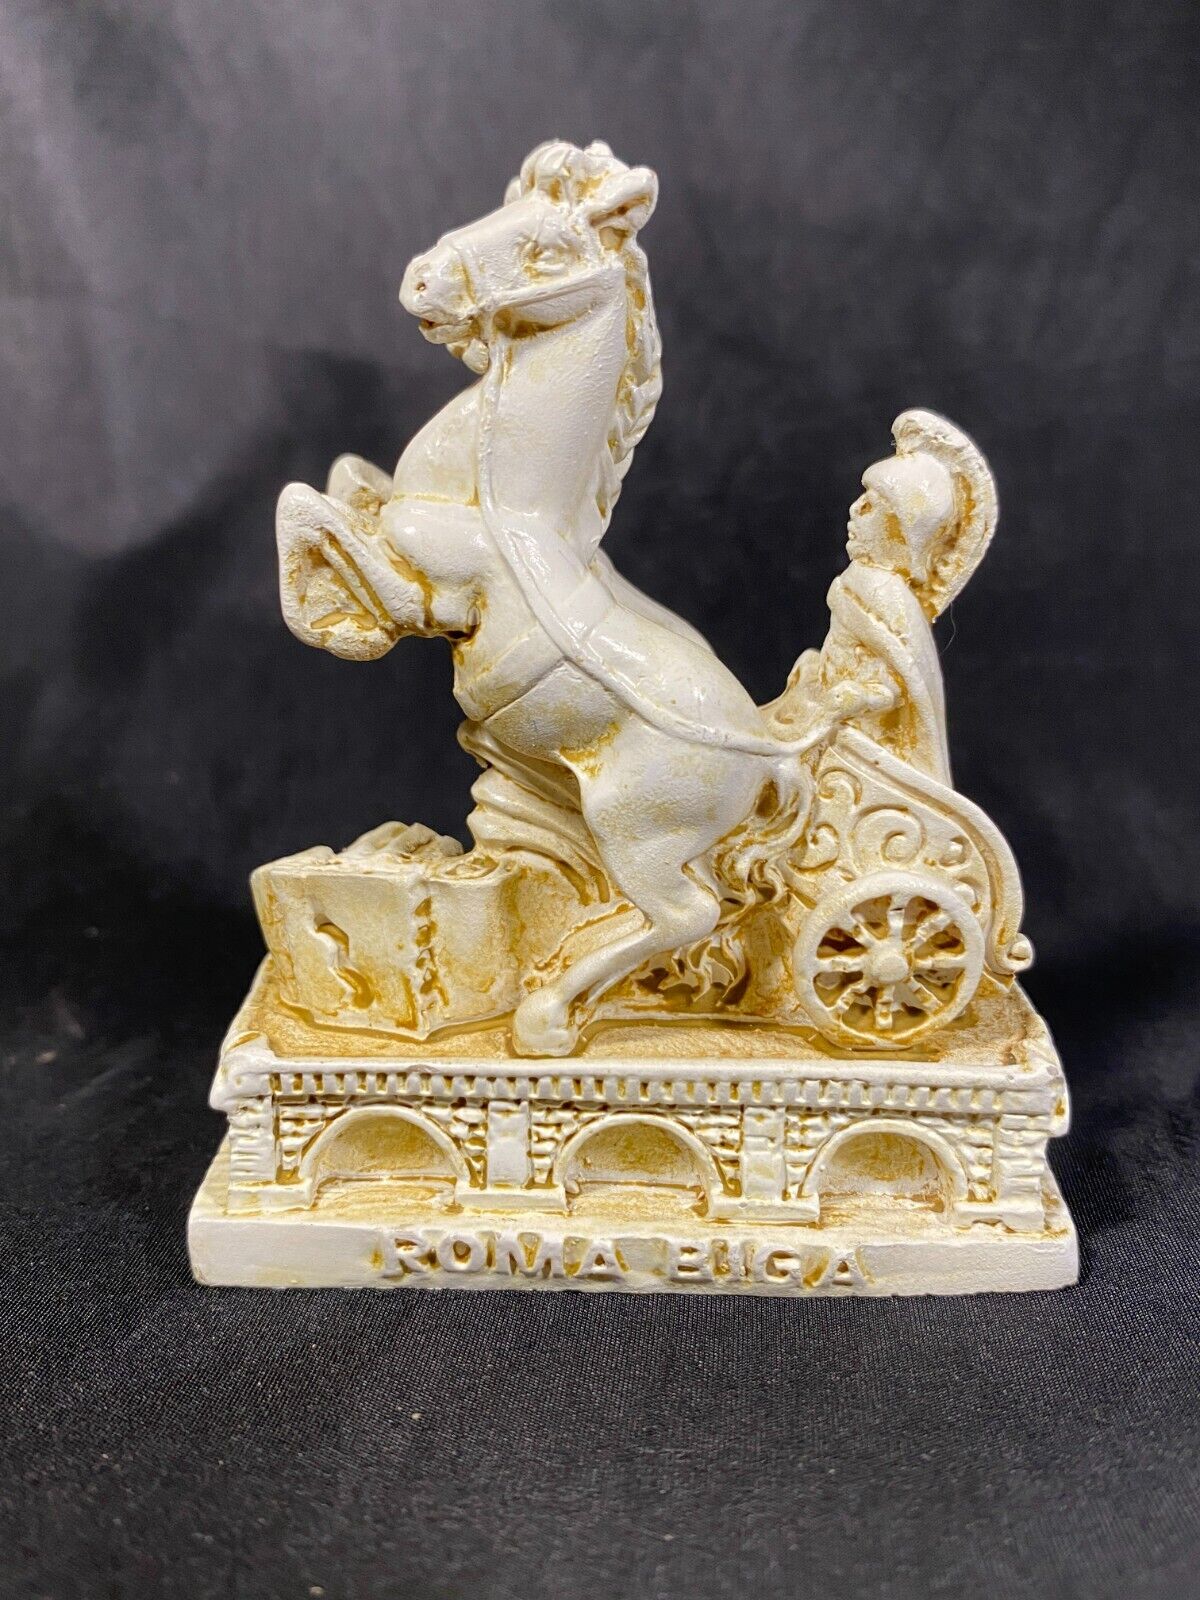 Roman Soldier on Chariot Small Souvenir Figurine from Rome